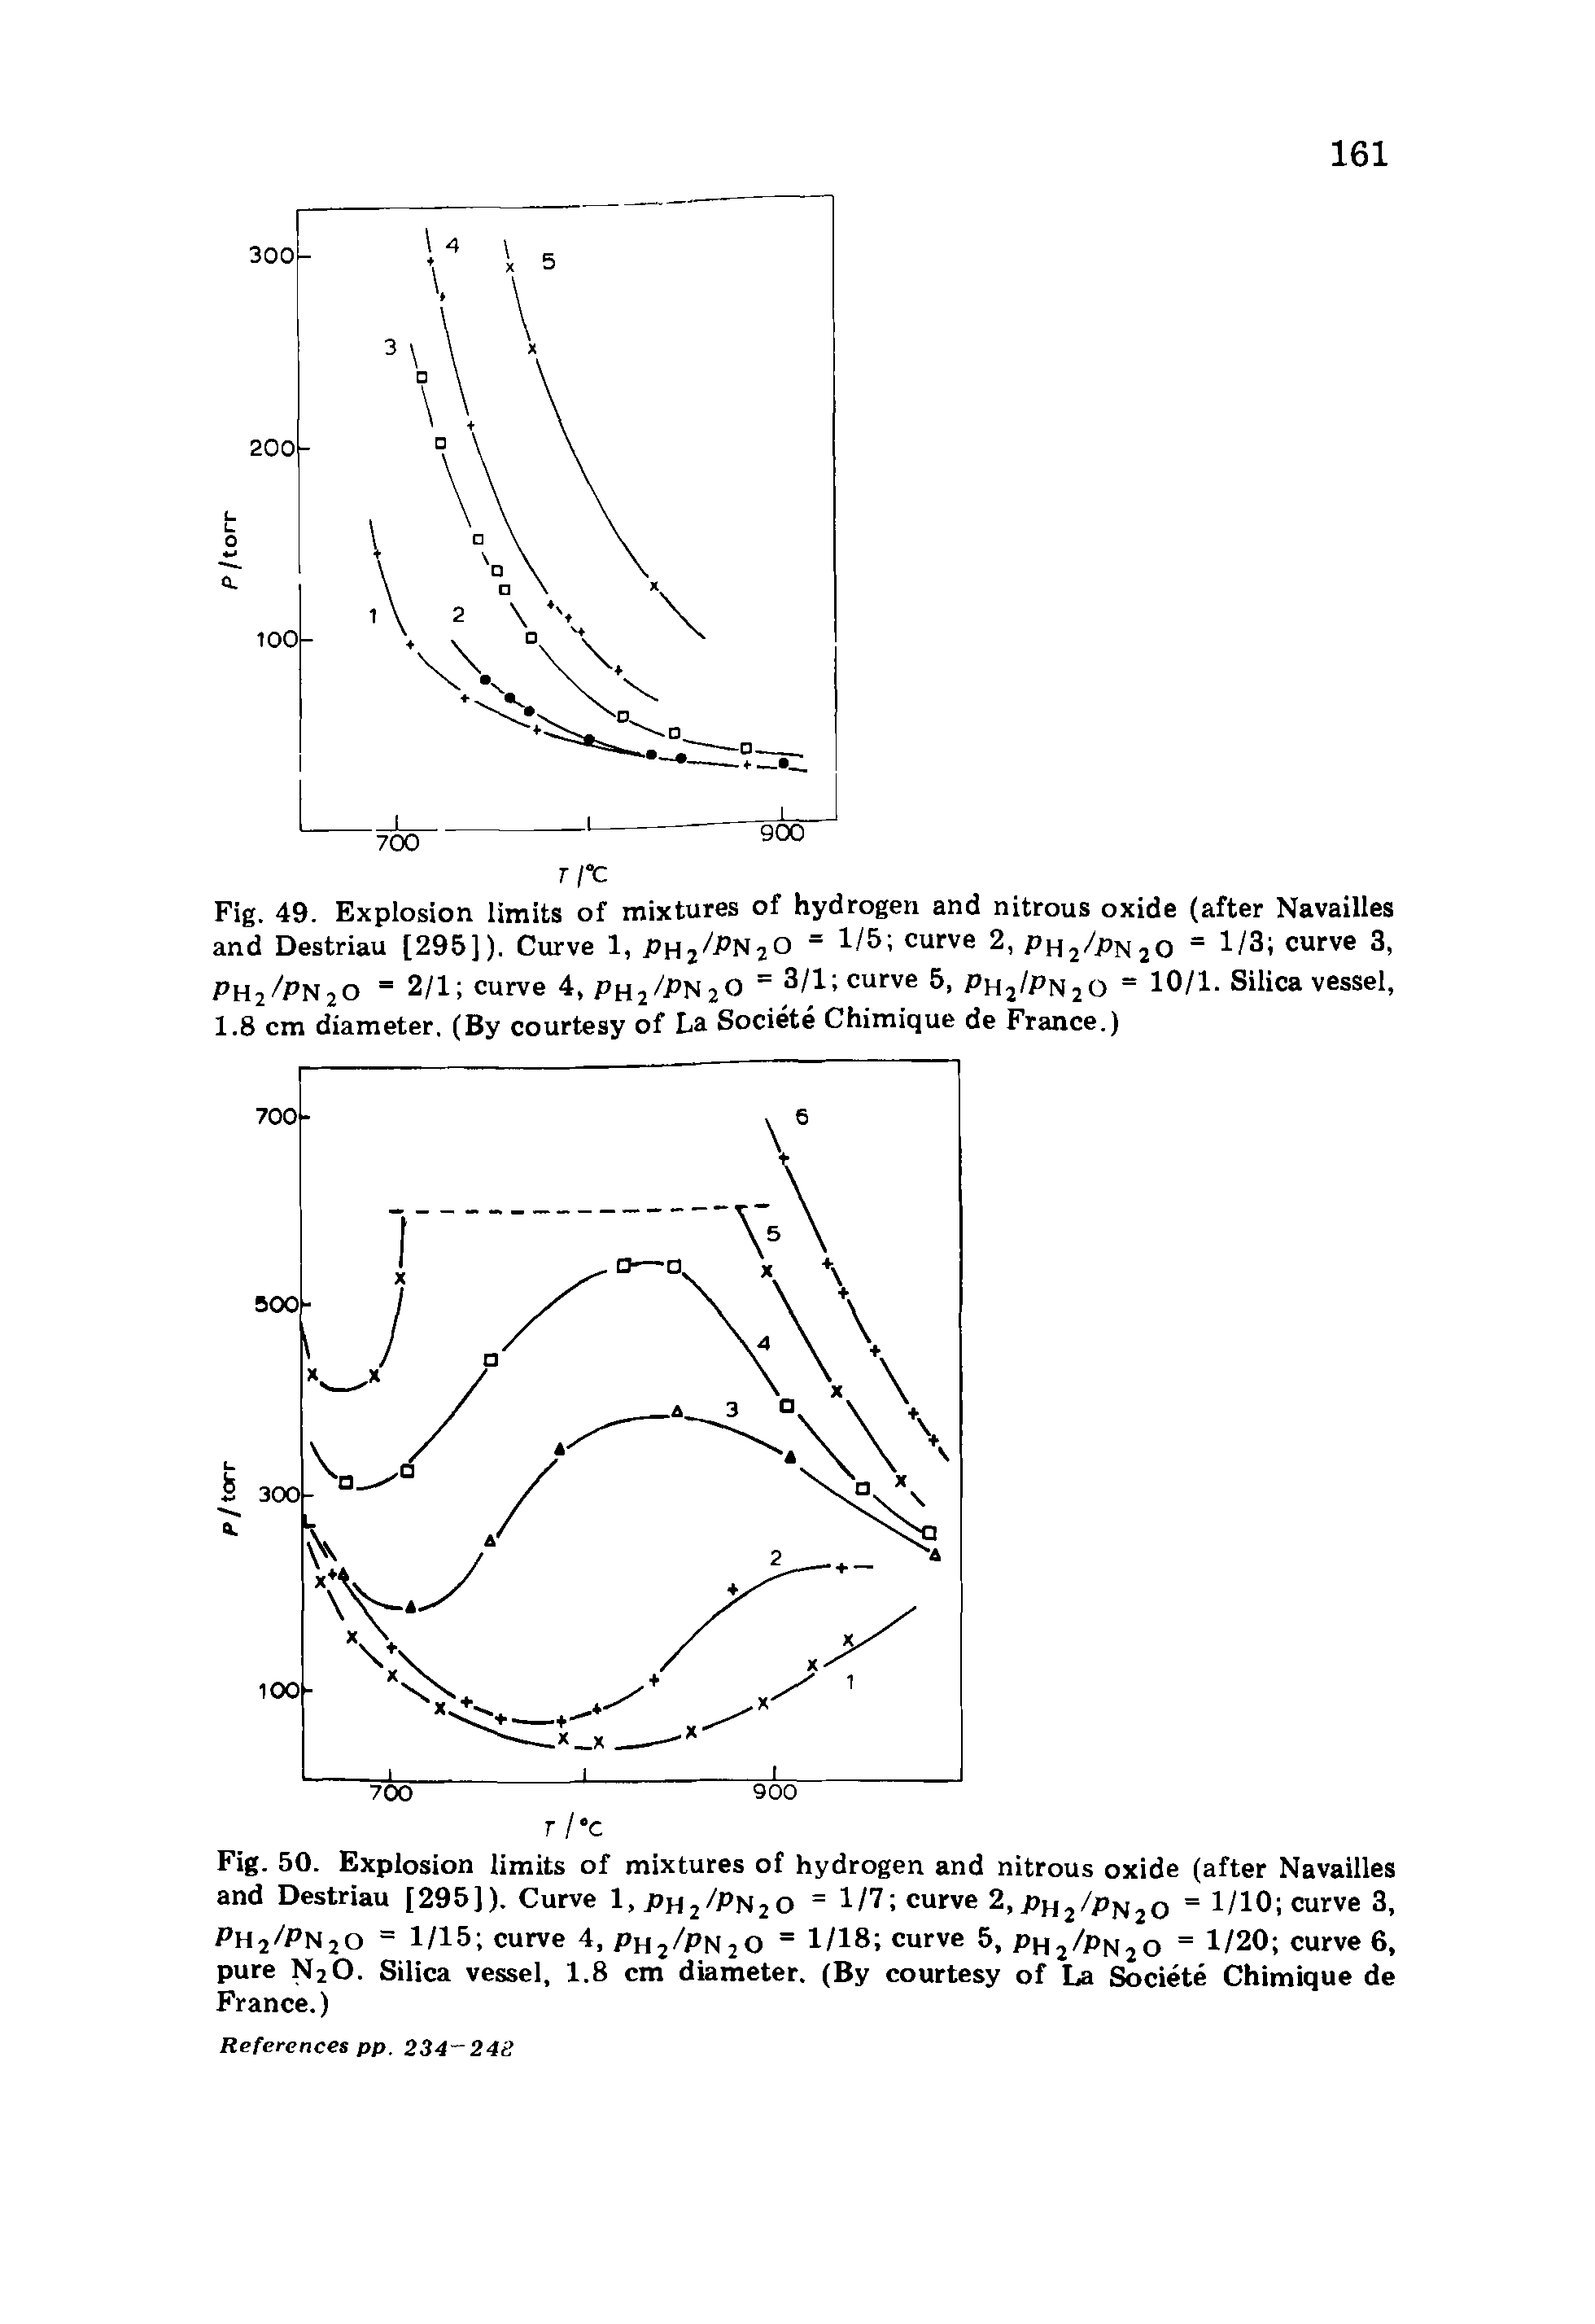 Fig. 50. Explosion limits of mixtures of hydrogen and nitrous oxide (after Navailles and Destriau [295]). Curve 1, pyi /Pf o = 1/7 curve 2,j h2/PN20 = 1/10 curve 3, PH2/PN2O = 1/15 curve 4, PH2/PN2O = 1/18 curve 5, PH2/PN2O = 1/20 curve 6, pure N2O. Silica vessel, 1.8 cm diameter. (By courtesy of La Societe Chimique de France.)...